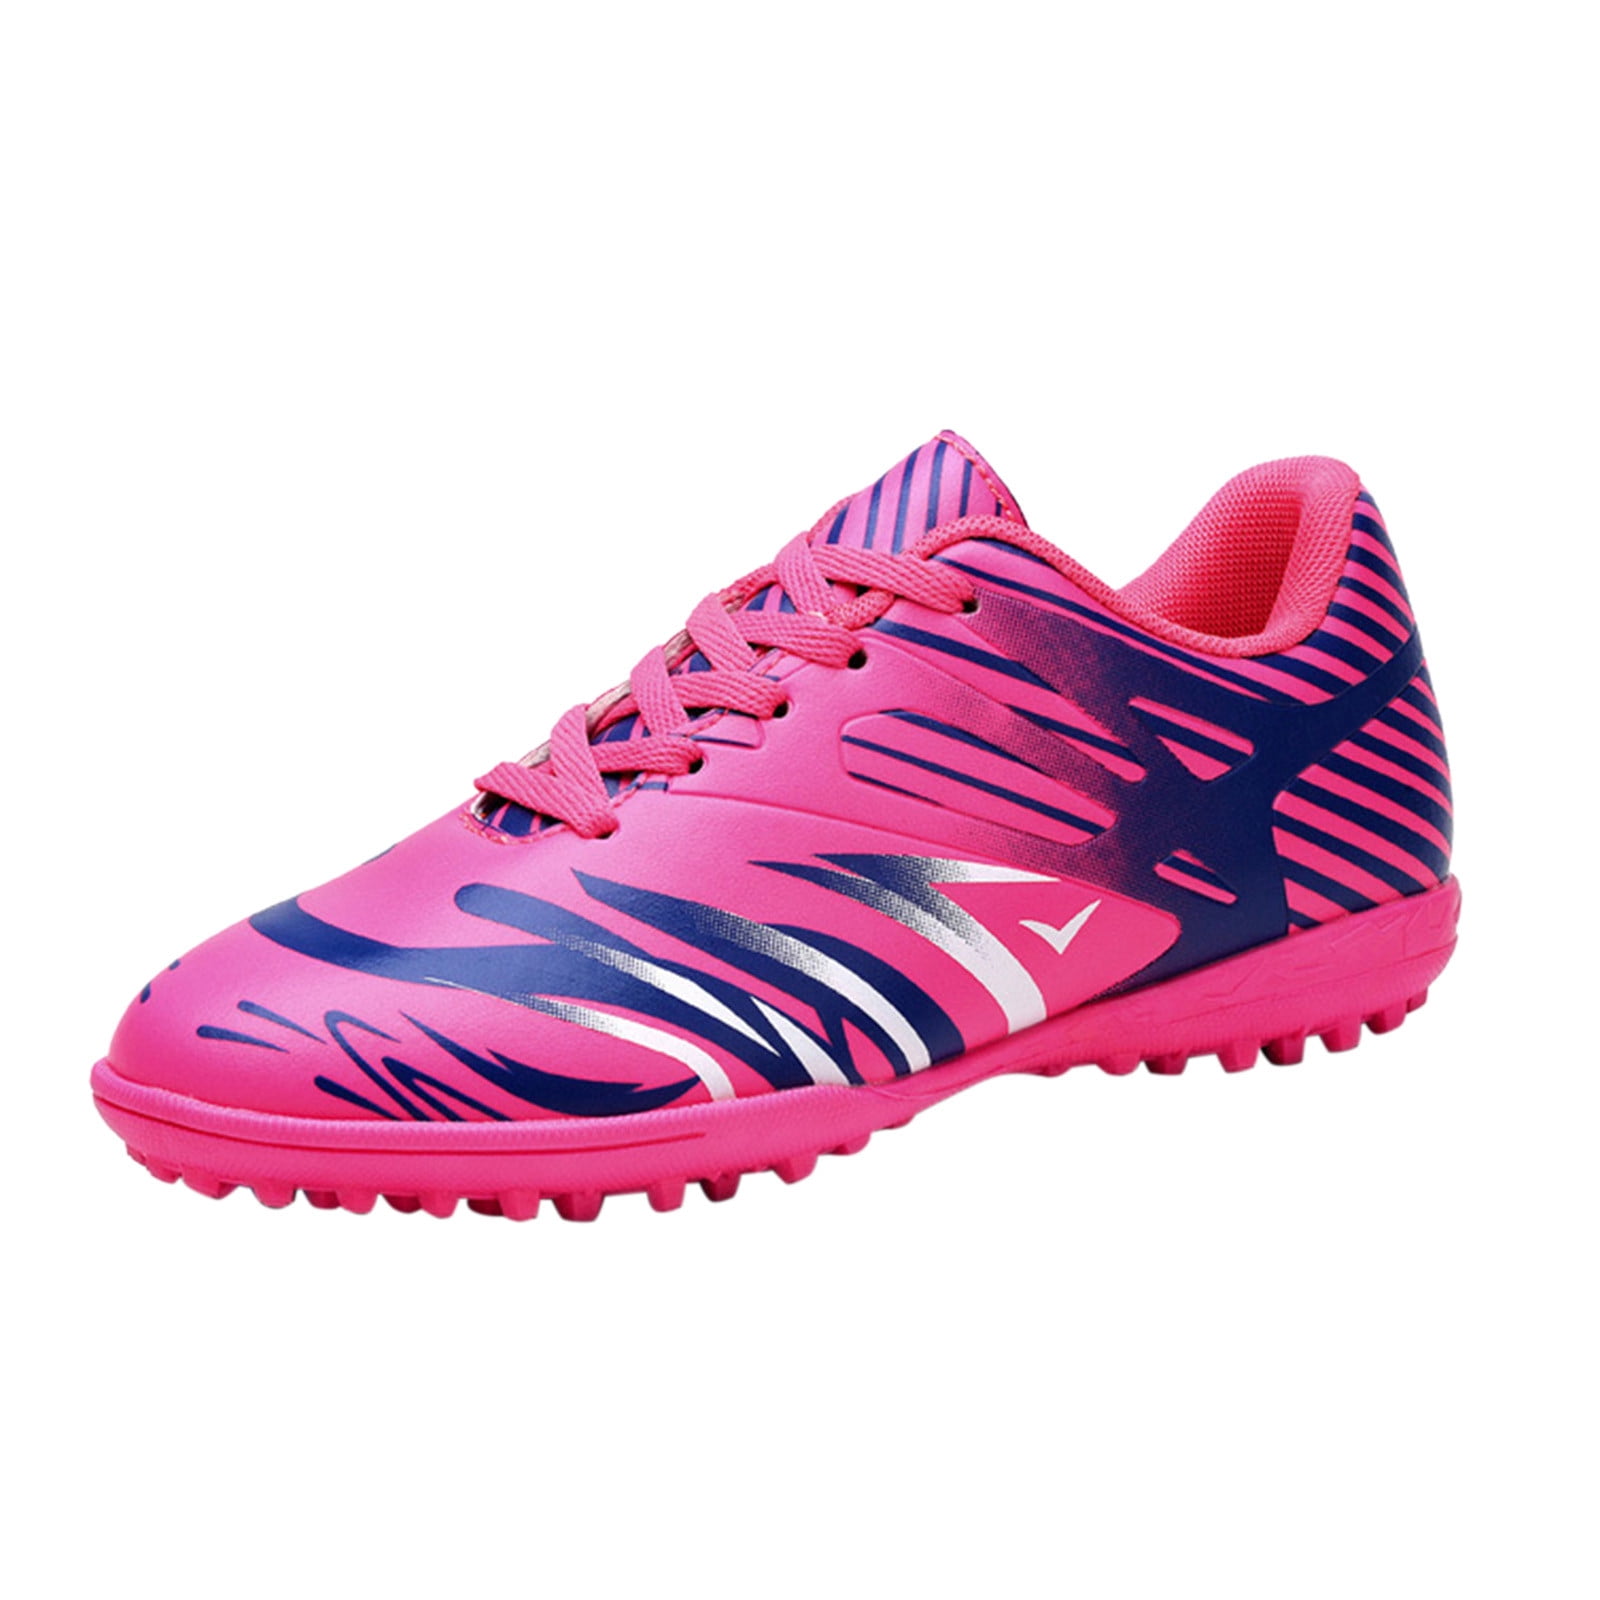 Baby Girls Boys Low-Top Training Shoes Kids Soccer Shoes Football Toddler Boy's shoes - Walmart.com